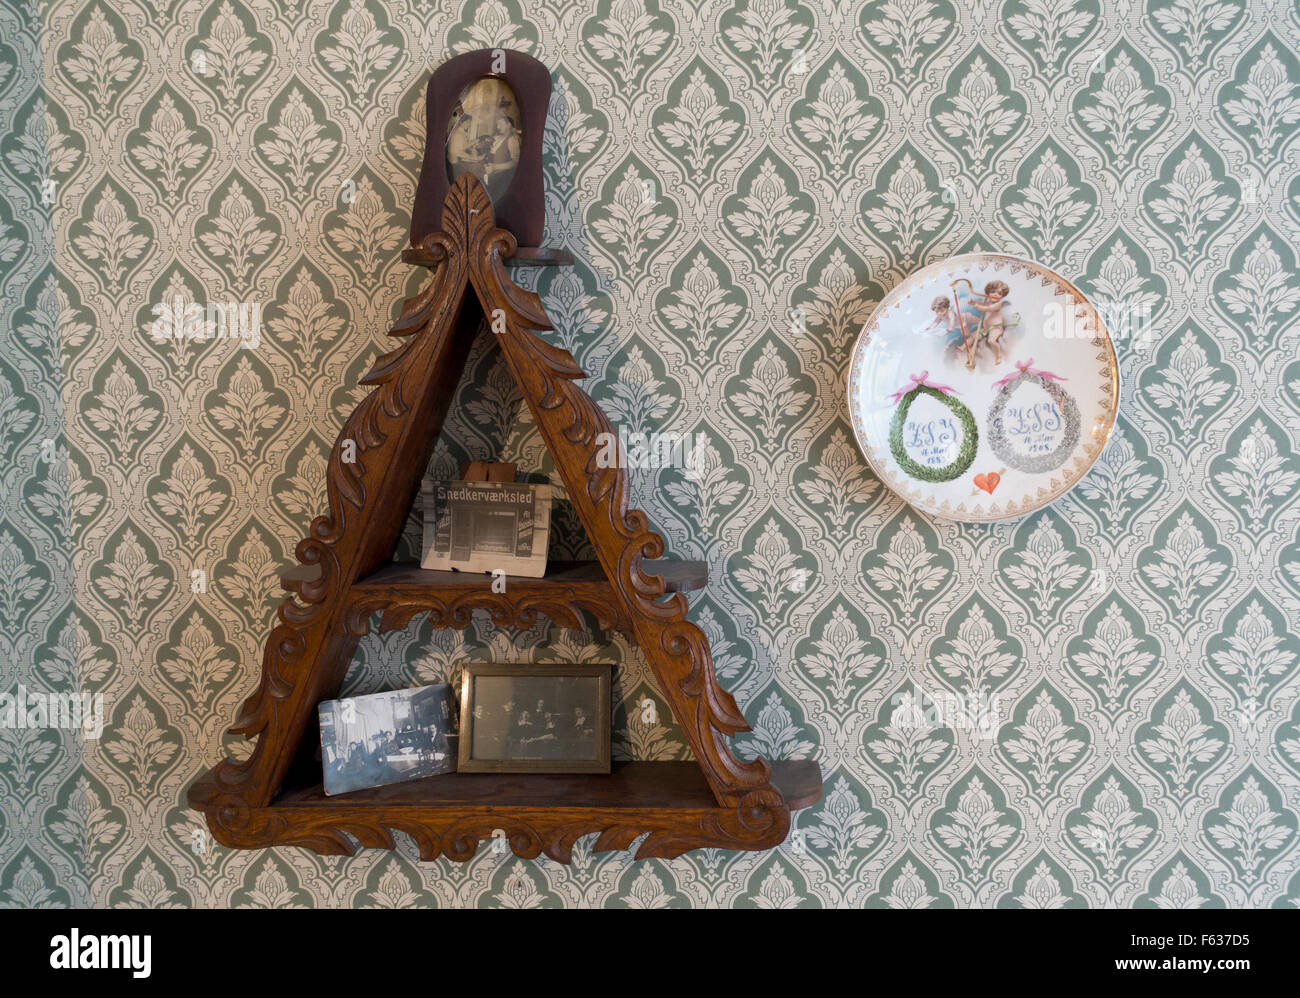 Old triangular shelf with family and small carpenter business photos beside a silver wedding plaque. Workers Museum, Copenhagen. Stock Photo